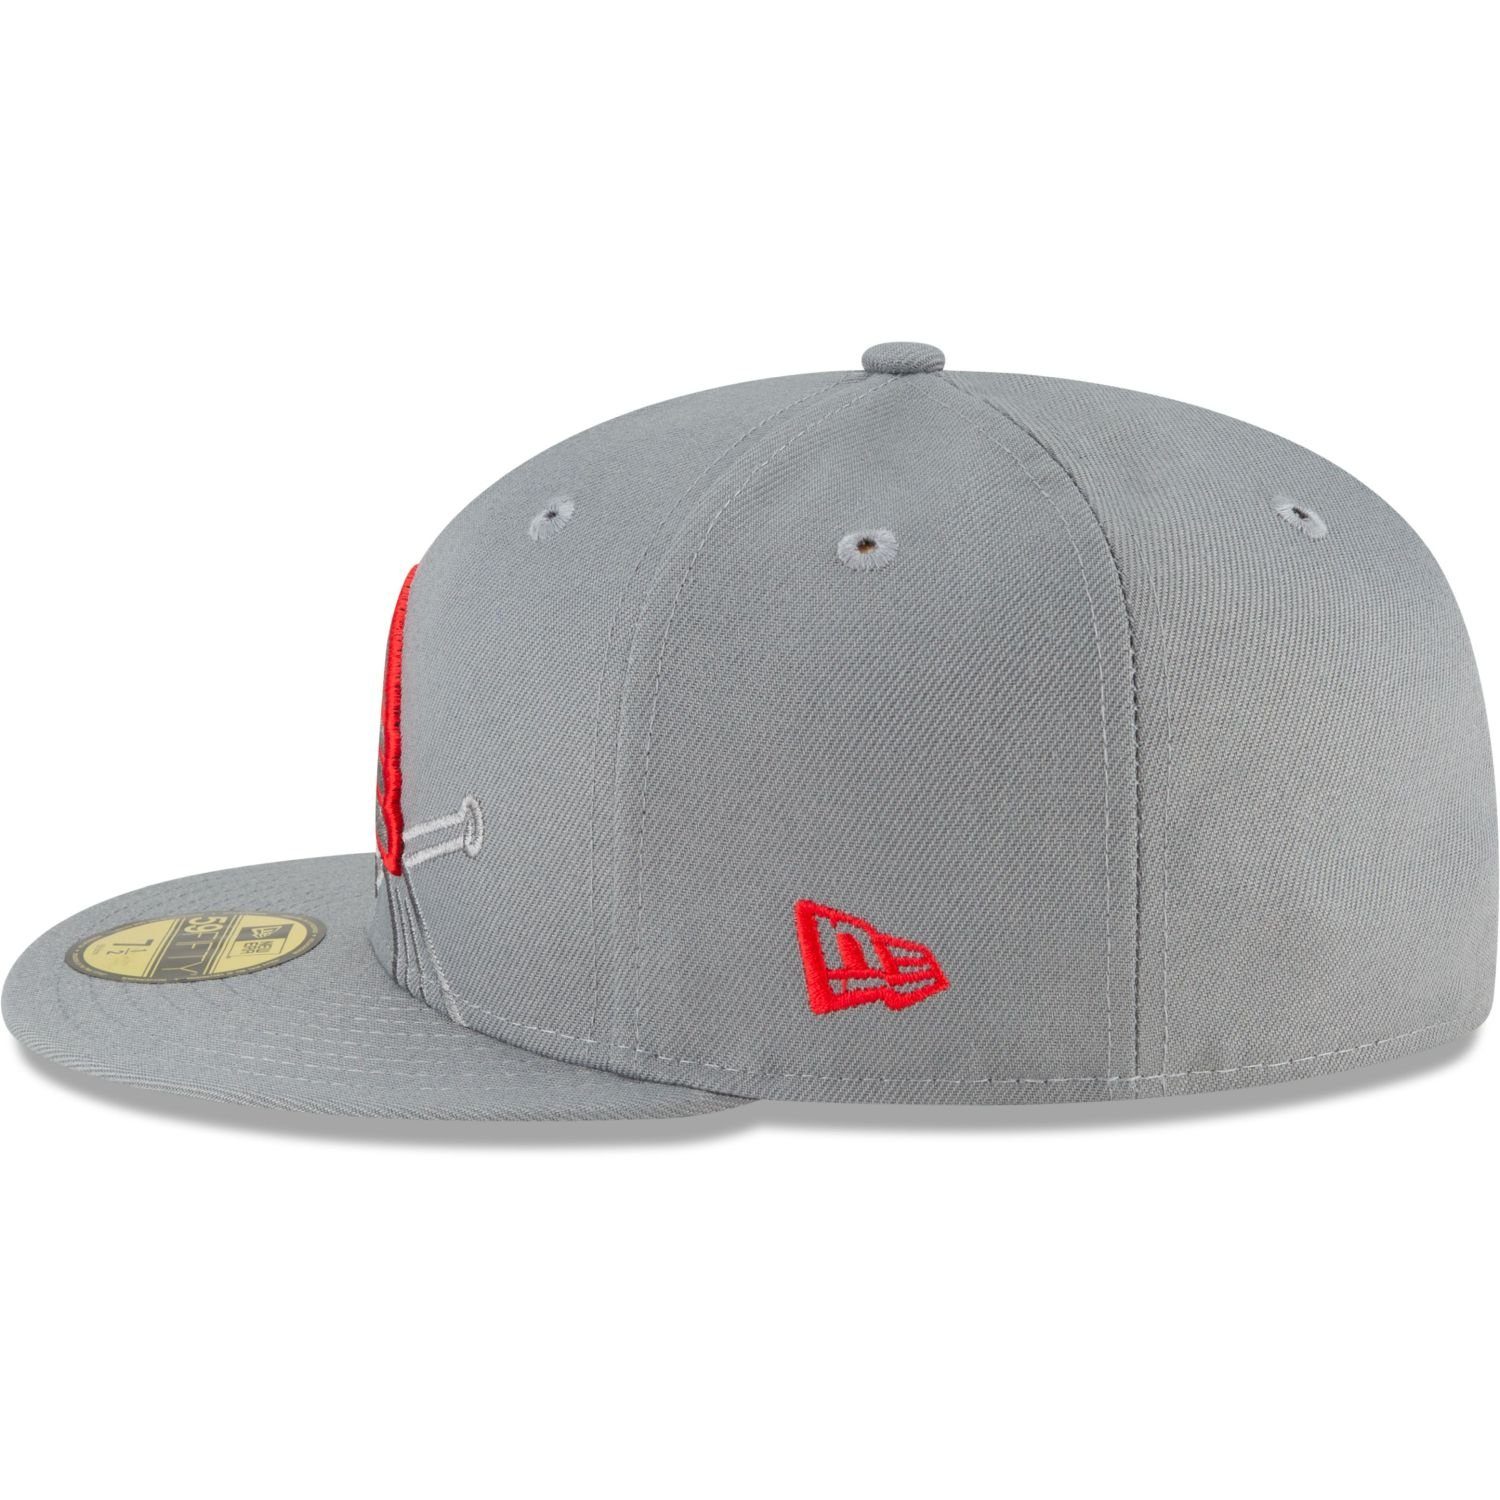 New Louis Team 59Fifty Cap Cooperstown STORM Era MLB GREY Cardinals Fitted St.